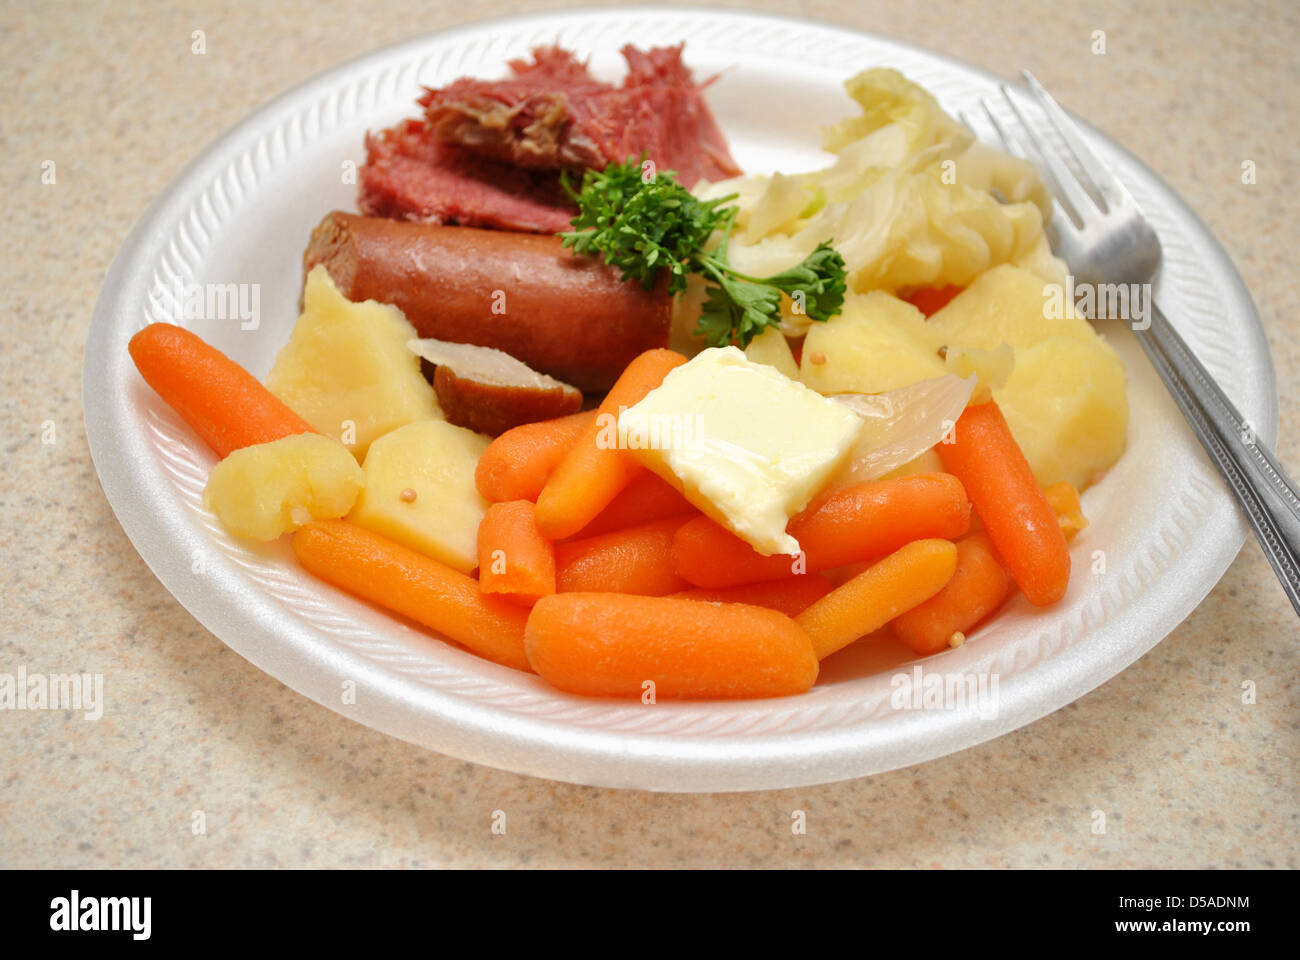 Delicious Boiled Dinner Stock Photo